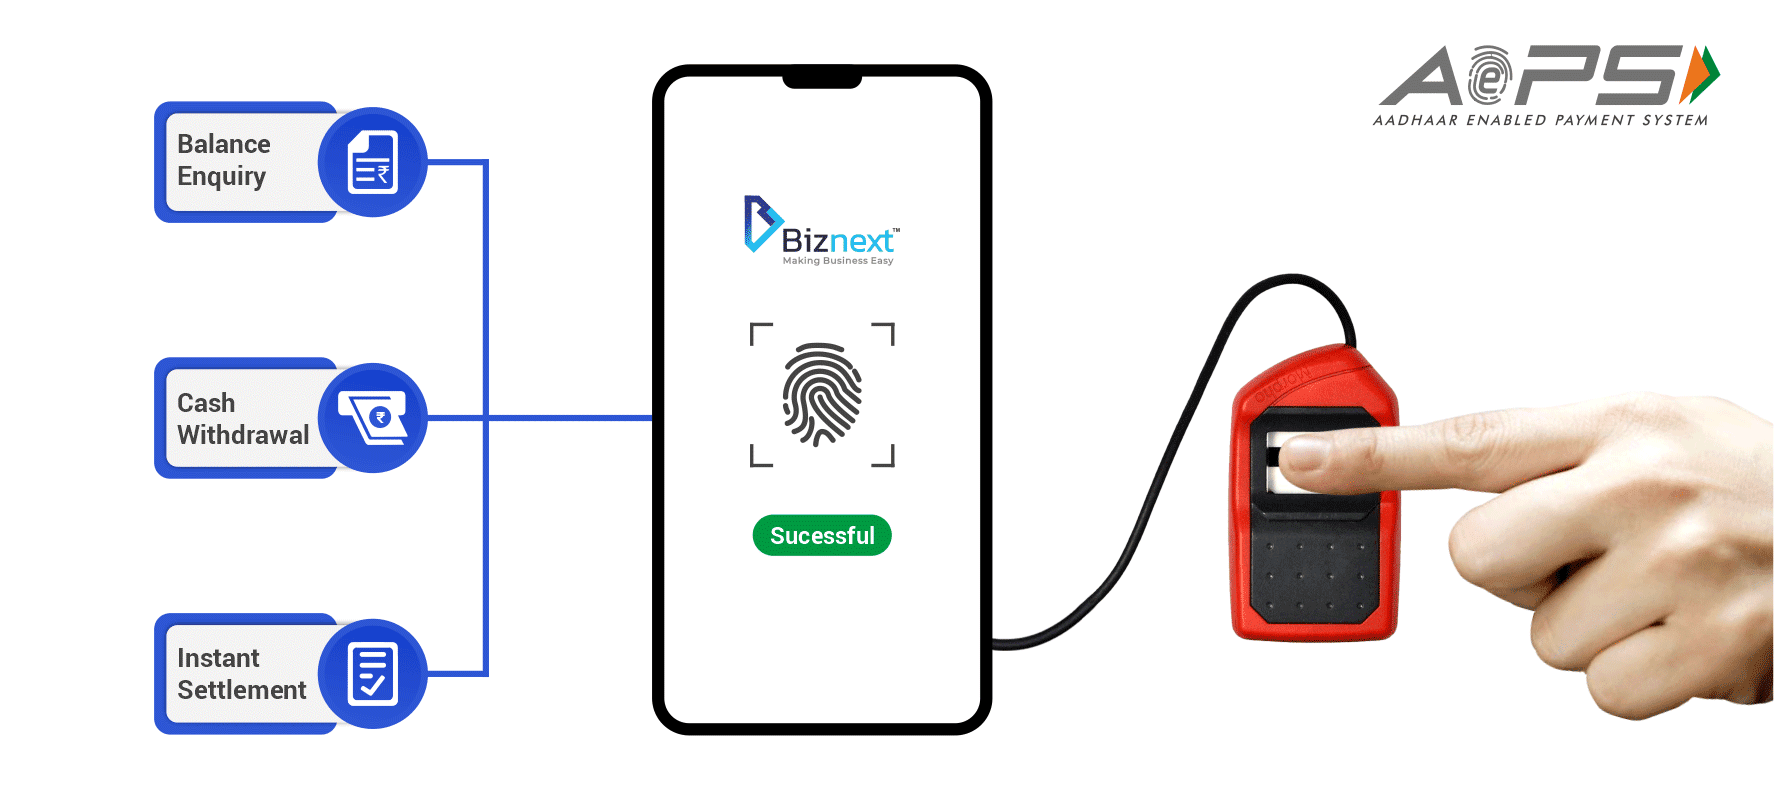 India AePS Case Study by Aratek Biometrics | [Aratek Case Study] India AePS  In early 2020, the Aratek A400 and A600 fingerprint scanners were granted  STQC and RD (registered device) certifications,... |